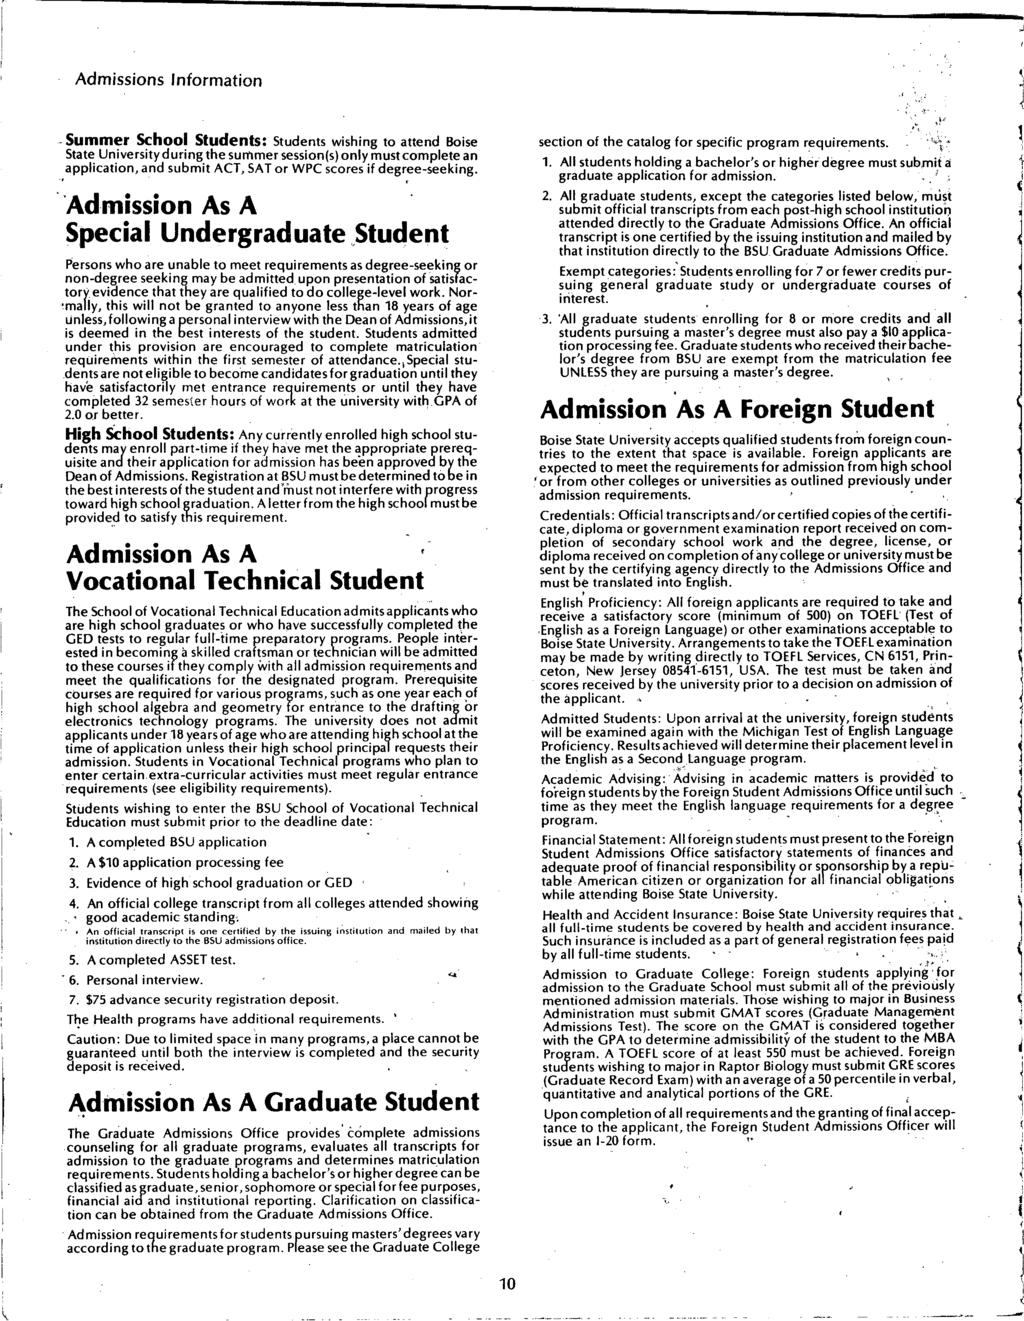 Admissions nformaion -Summer School Sudens: Sudens wishing o aend Boise Sae Universiy during he summer session(s) only mus complee an applicaion, and submi ACT, SATor WPC scores if degree-seeking.